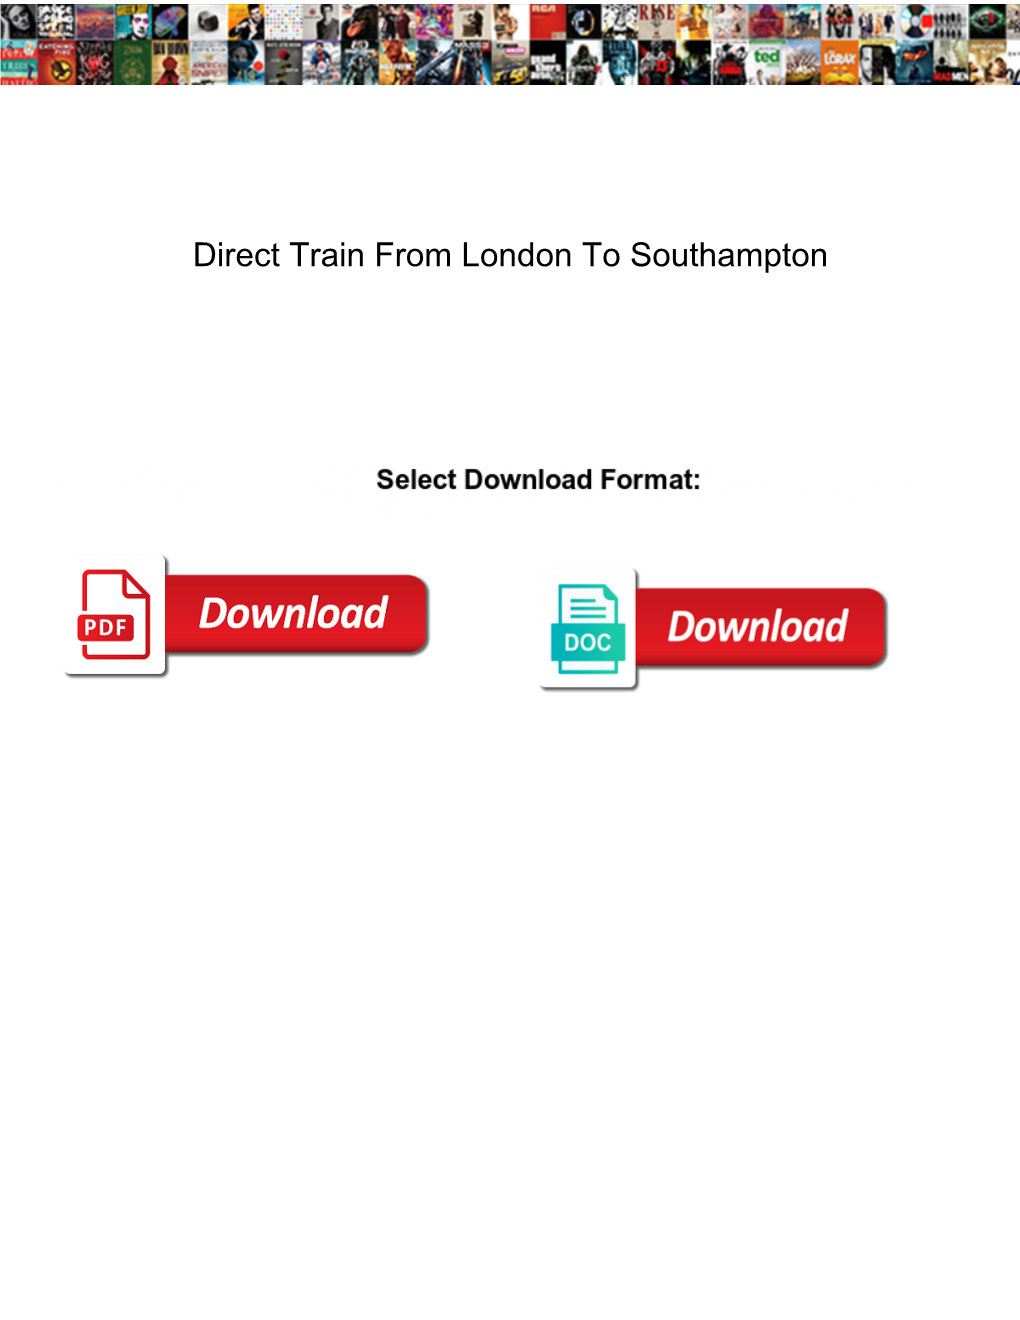 Direct Train from London to Southampton